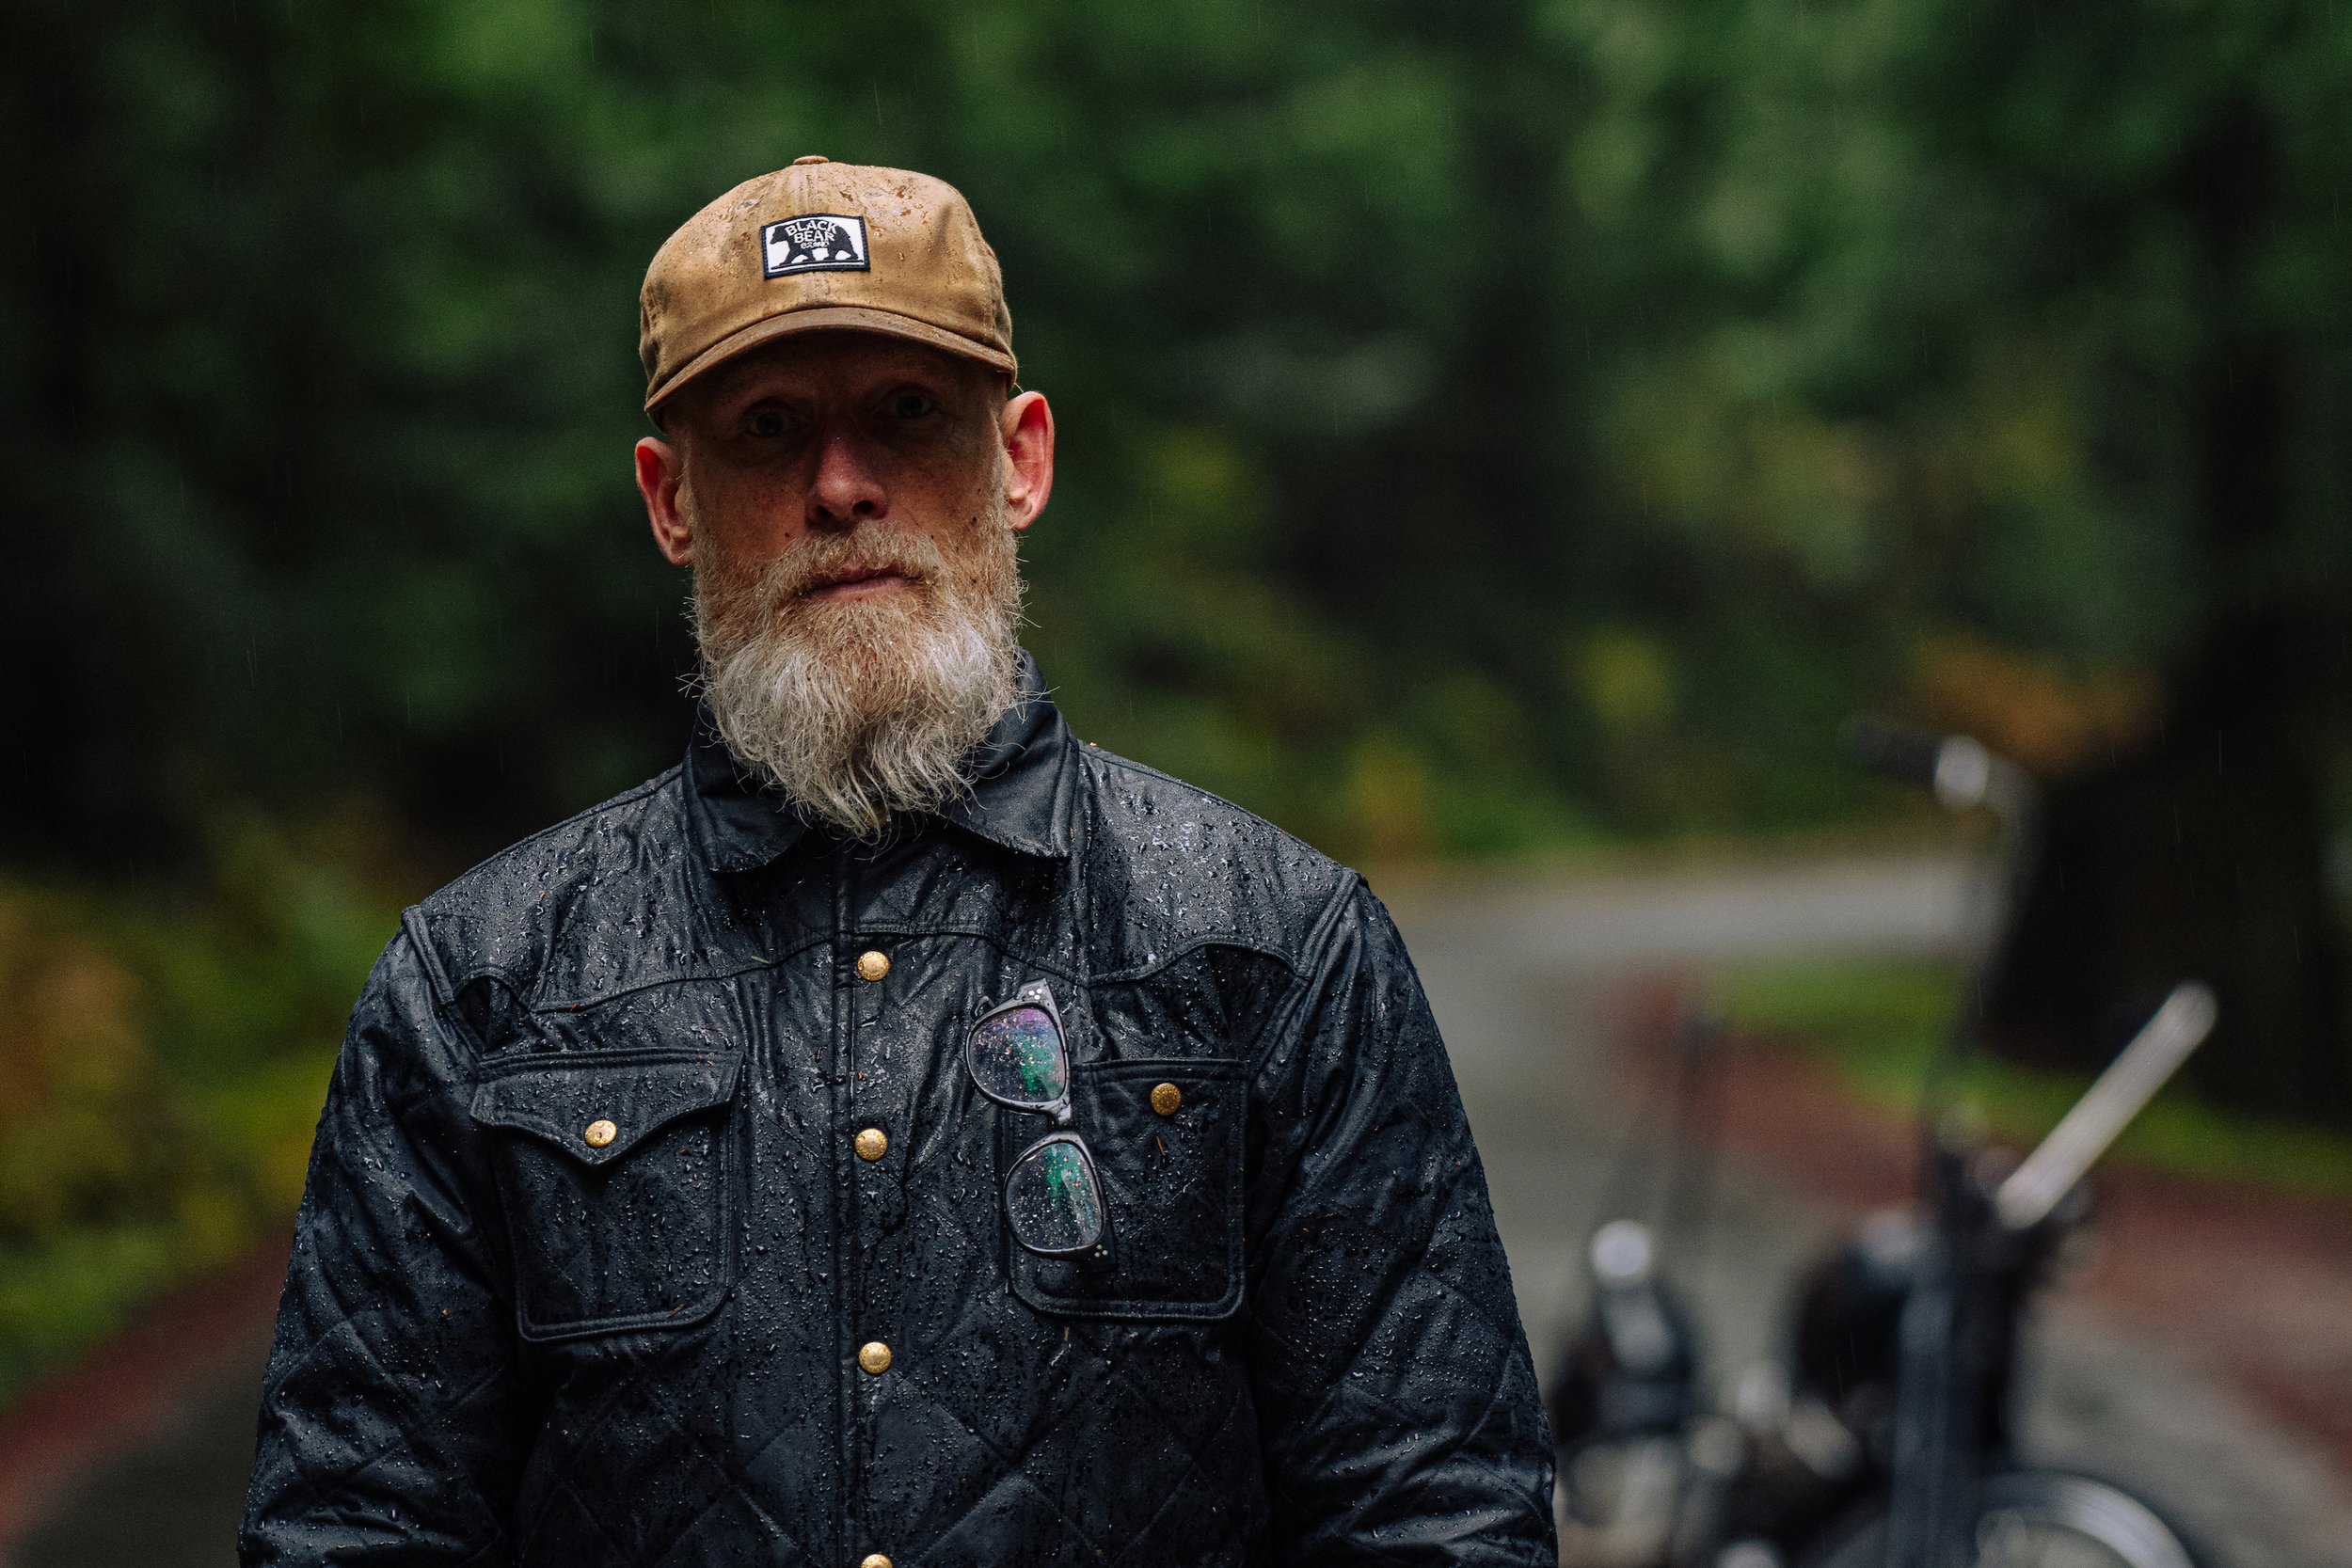 Black Bear Brand BLACK Wax Canvas Embracing the elements in style! 🌲🏍️ This rugged adventurer conquers the Pacific Northwest rainforest on his sleek motorcycle